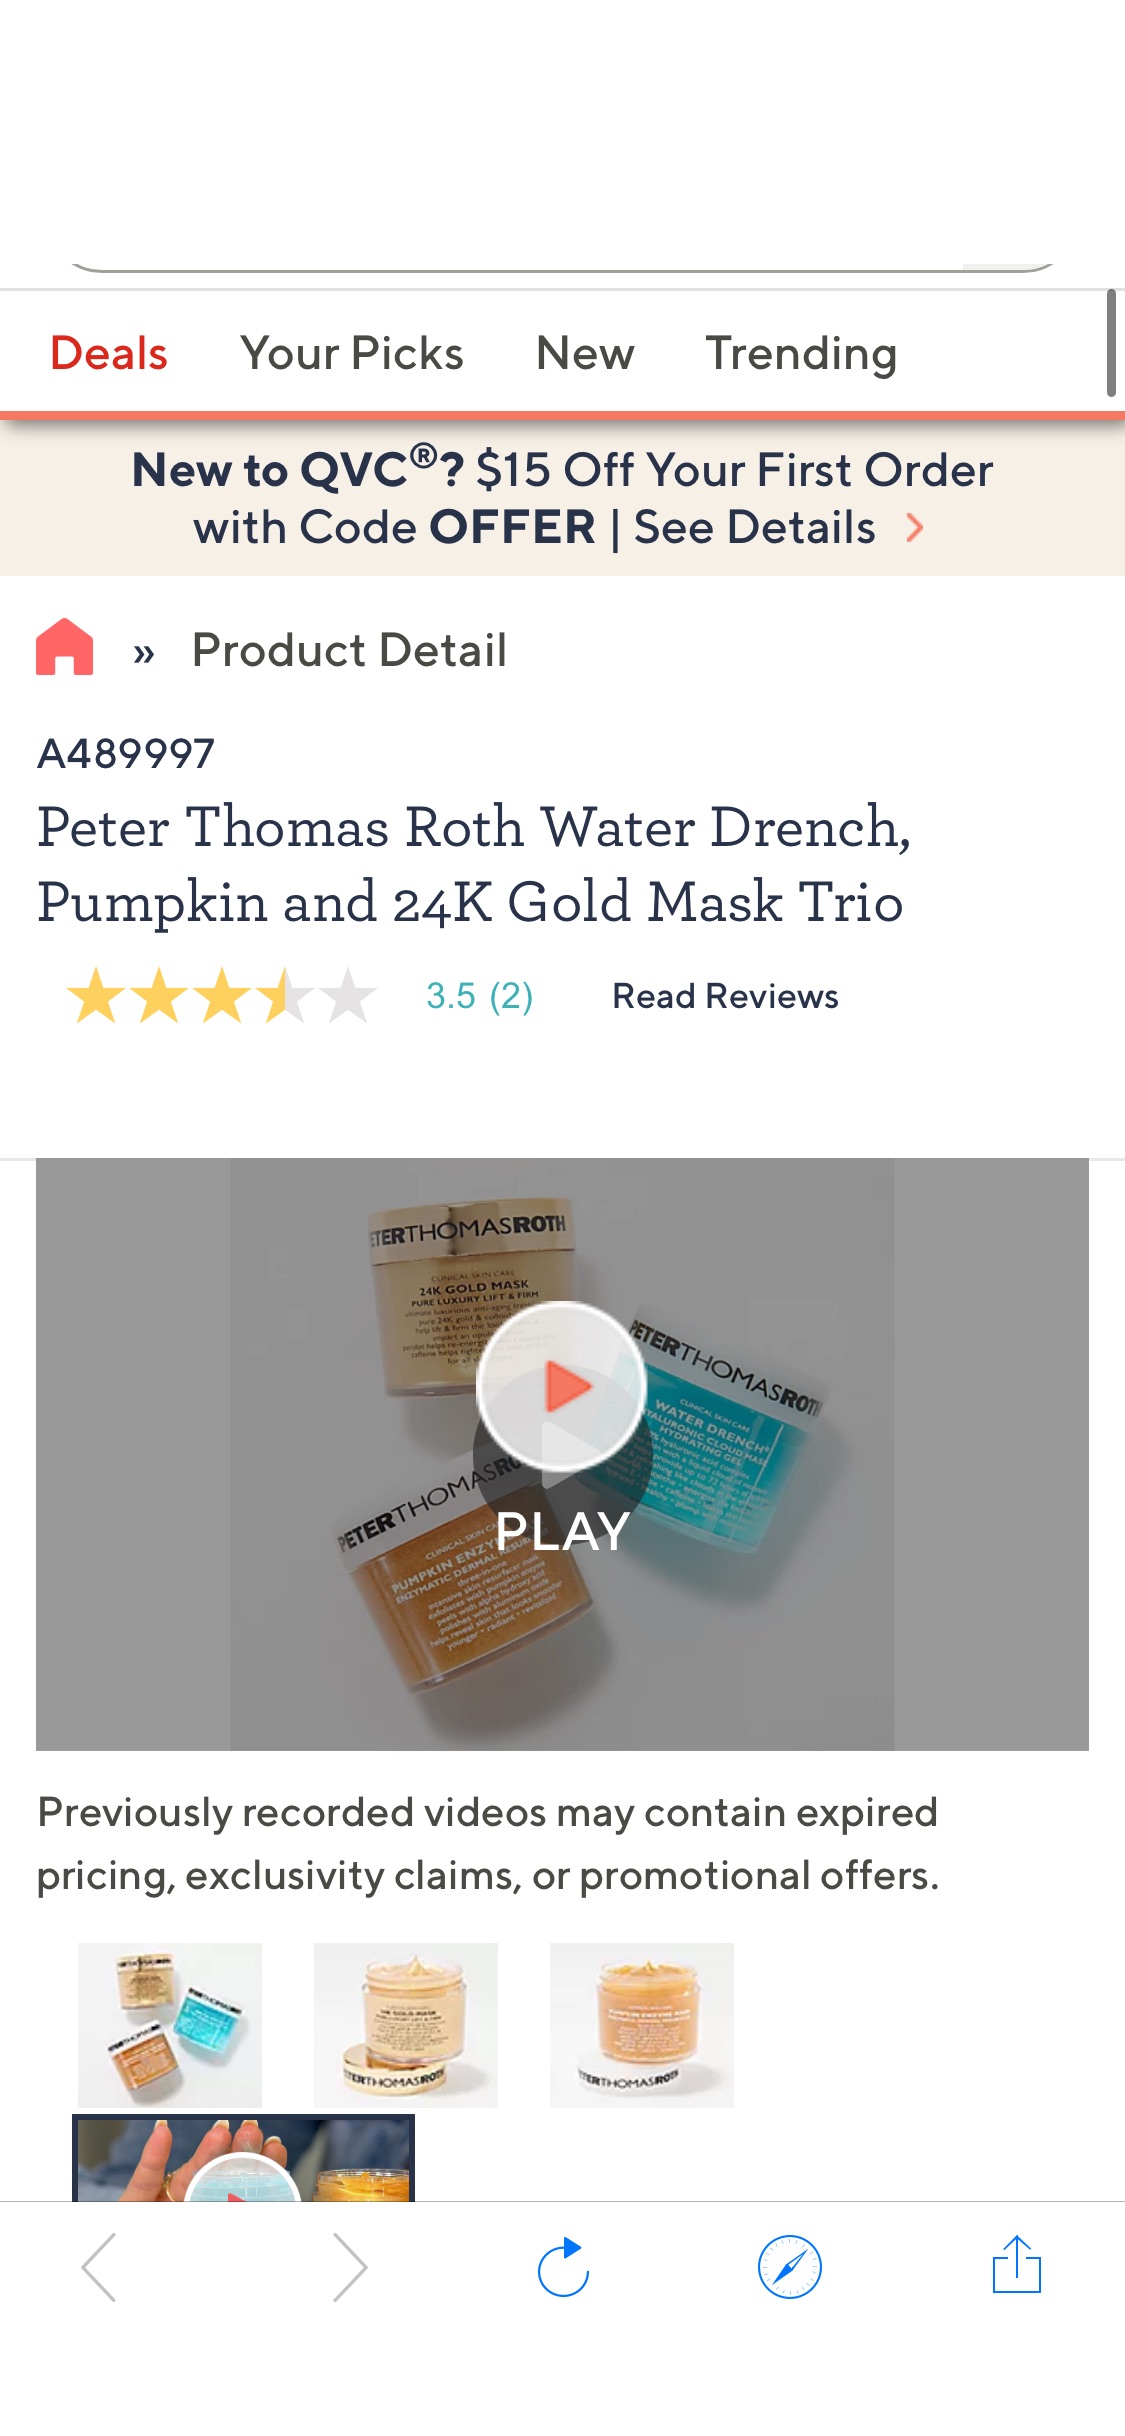 Peter Thomas Roth Water Drench, Pumpkin and 24K Gold Mask Trio - QVC.com